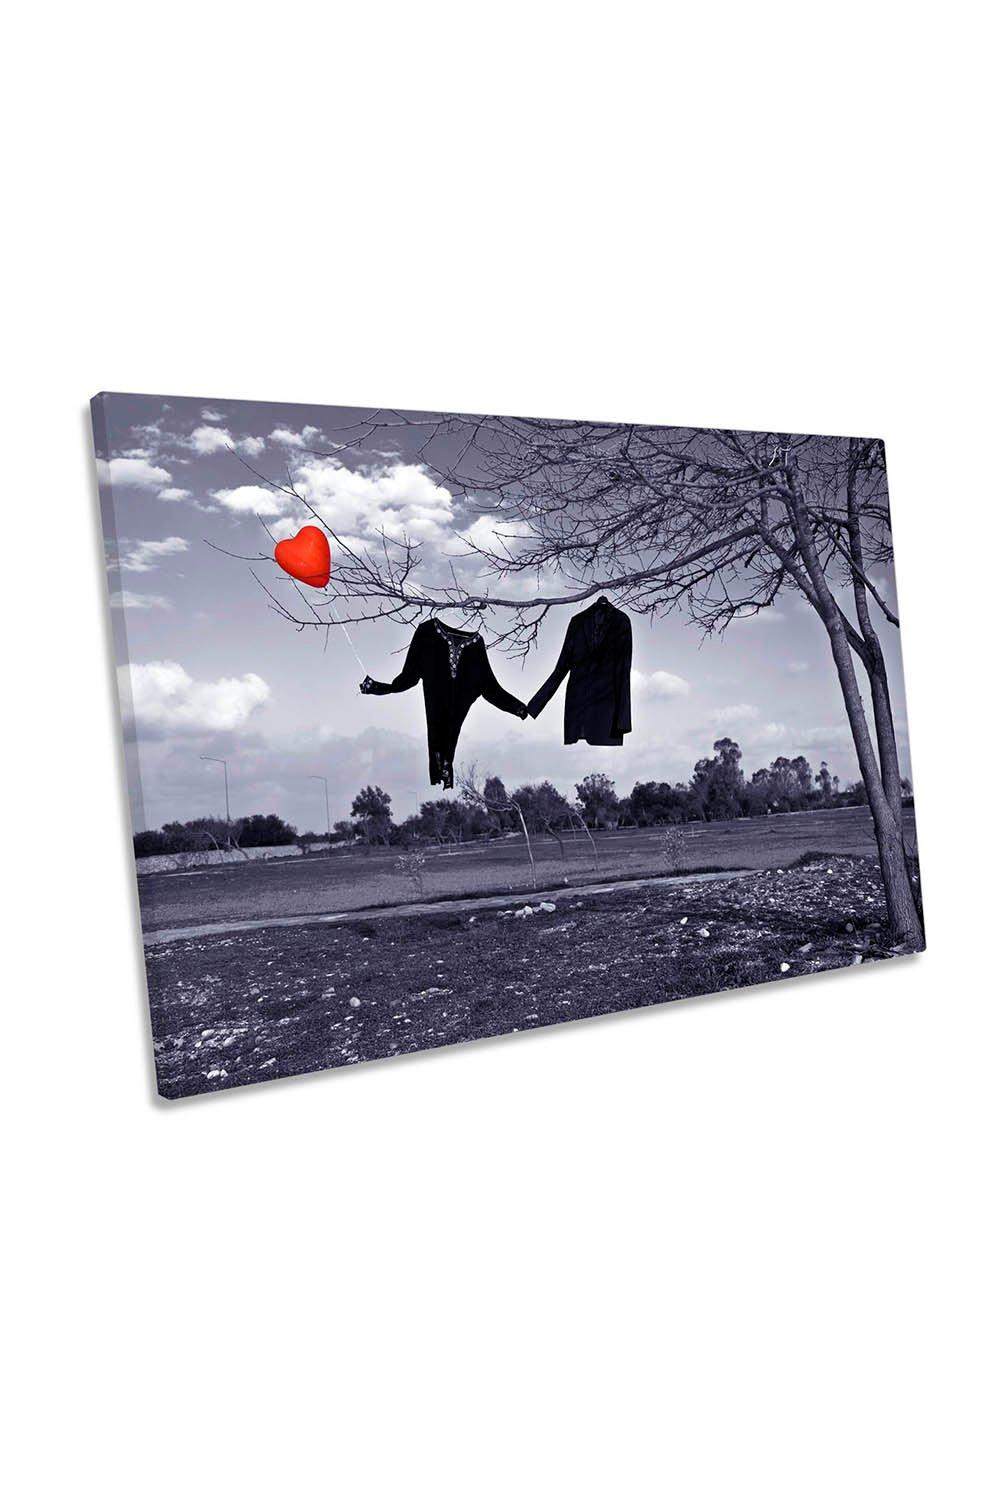 Immortal Love Red Balloon Canvas Wall Art Picture Print